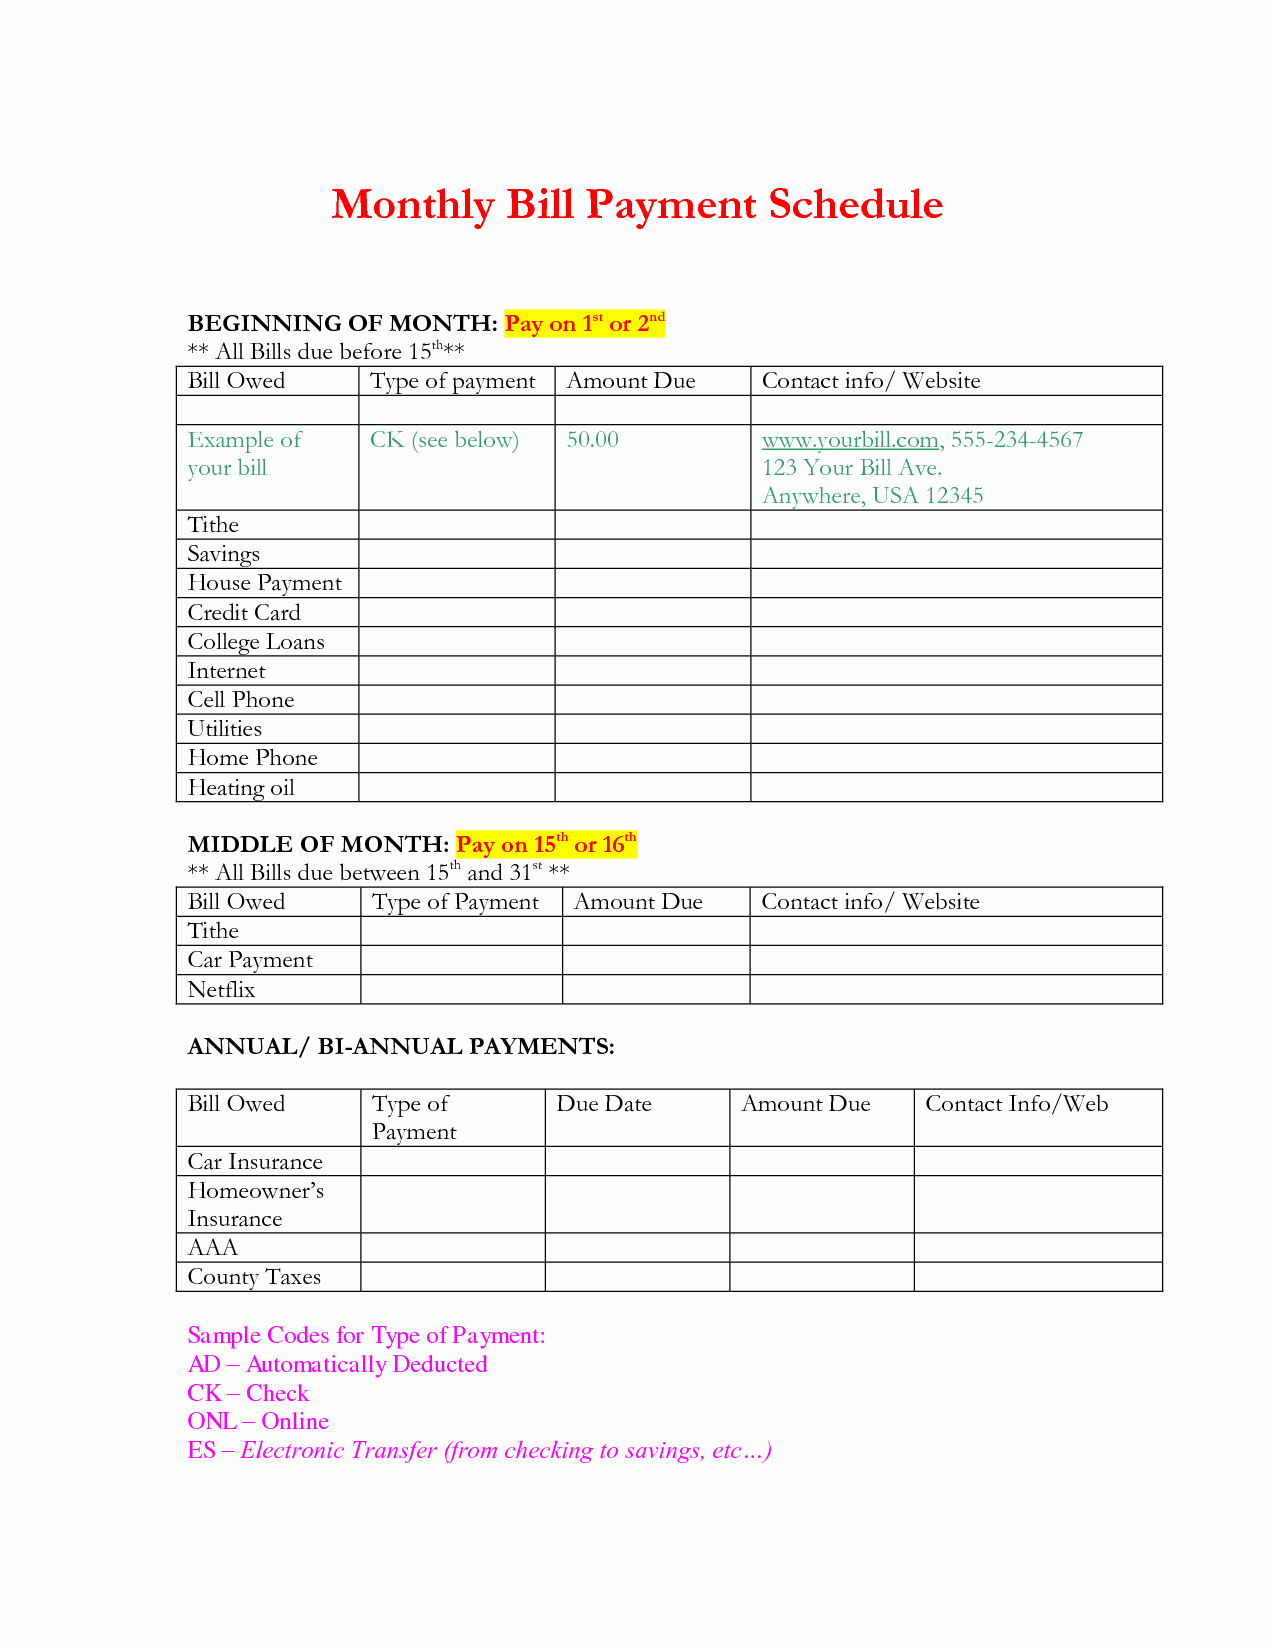 Bill Payment Calendar Template Luxury Printable Monthly Bill Payment Schedule and Checklist